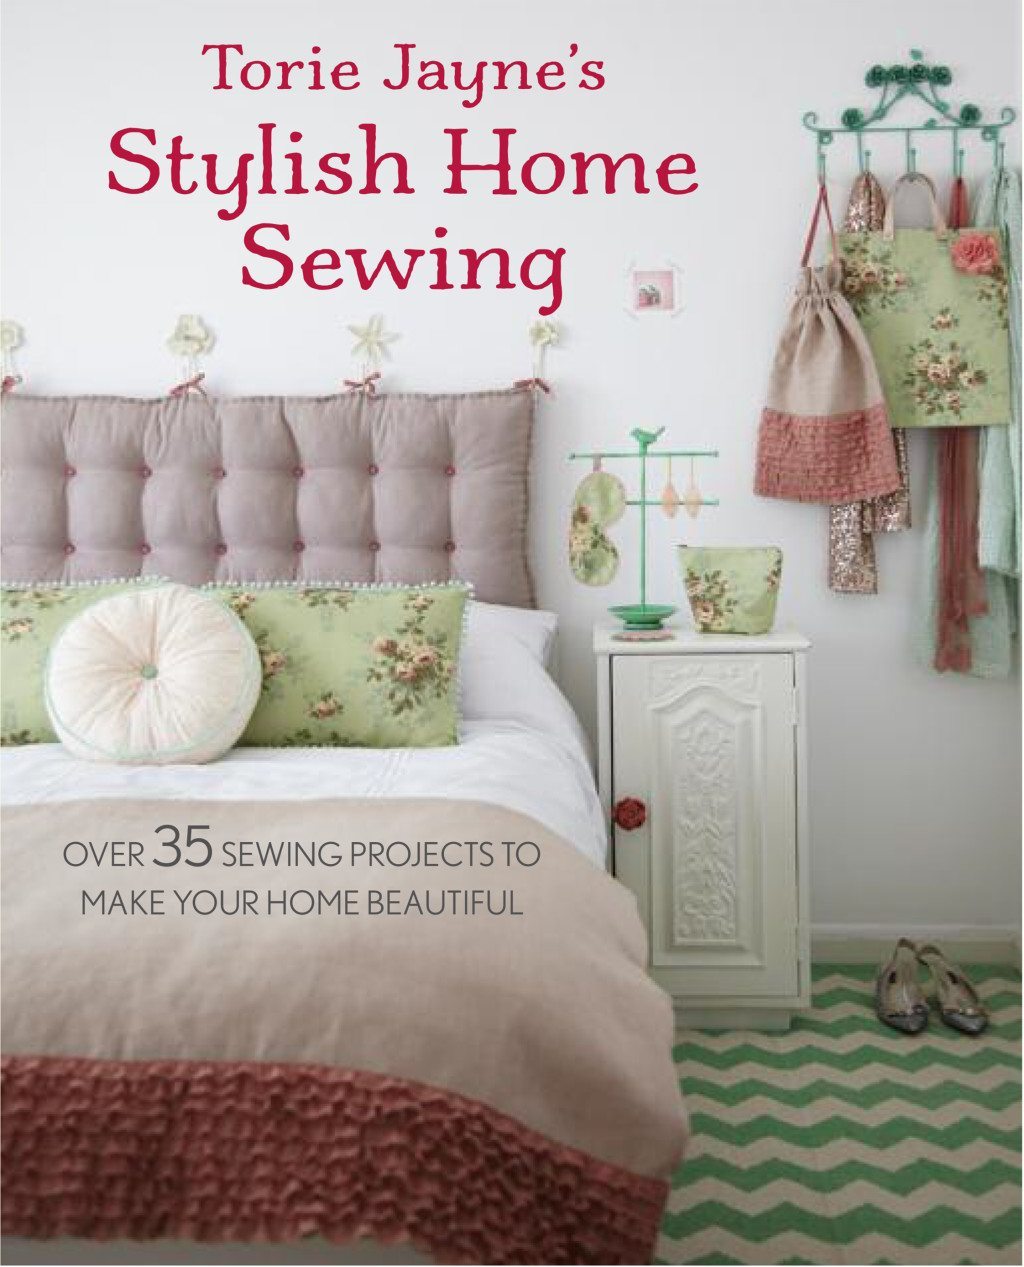 Stylish Home Sewing: 35 Perfect Ways to Make Your Home Beautiful by Torie Jayne